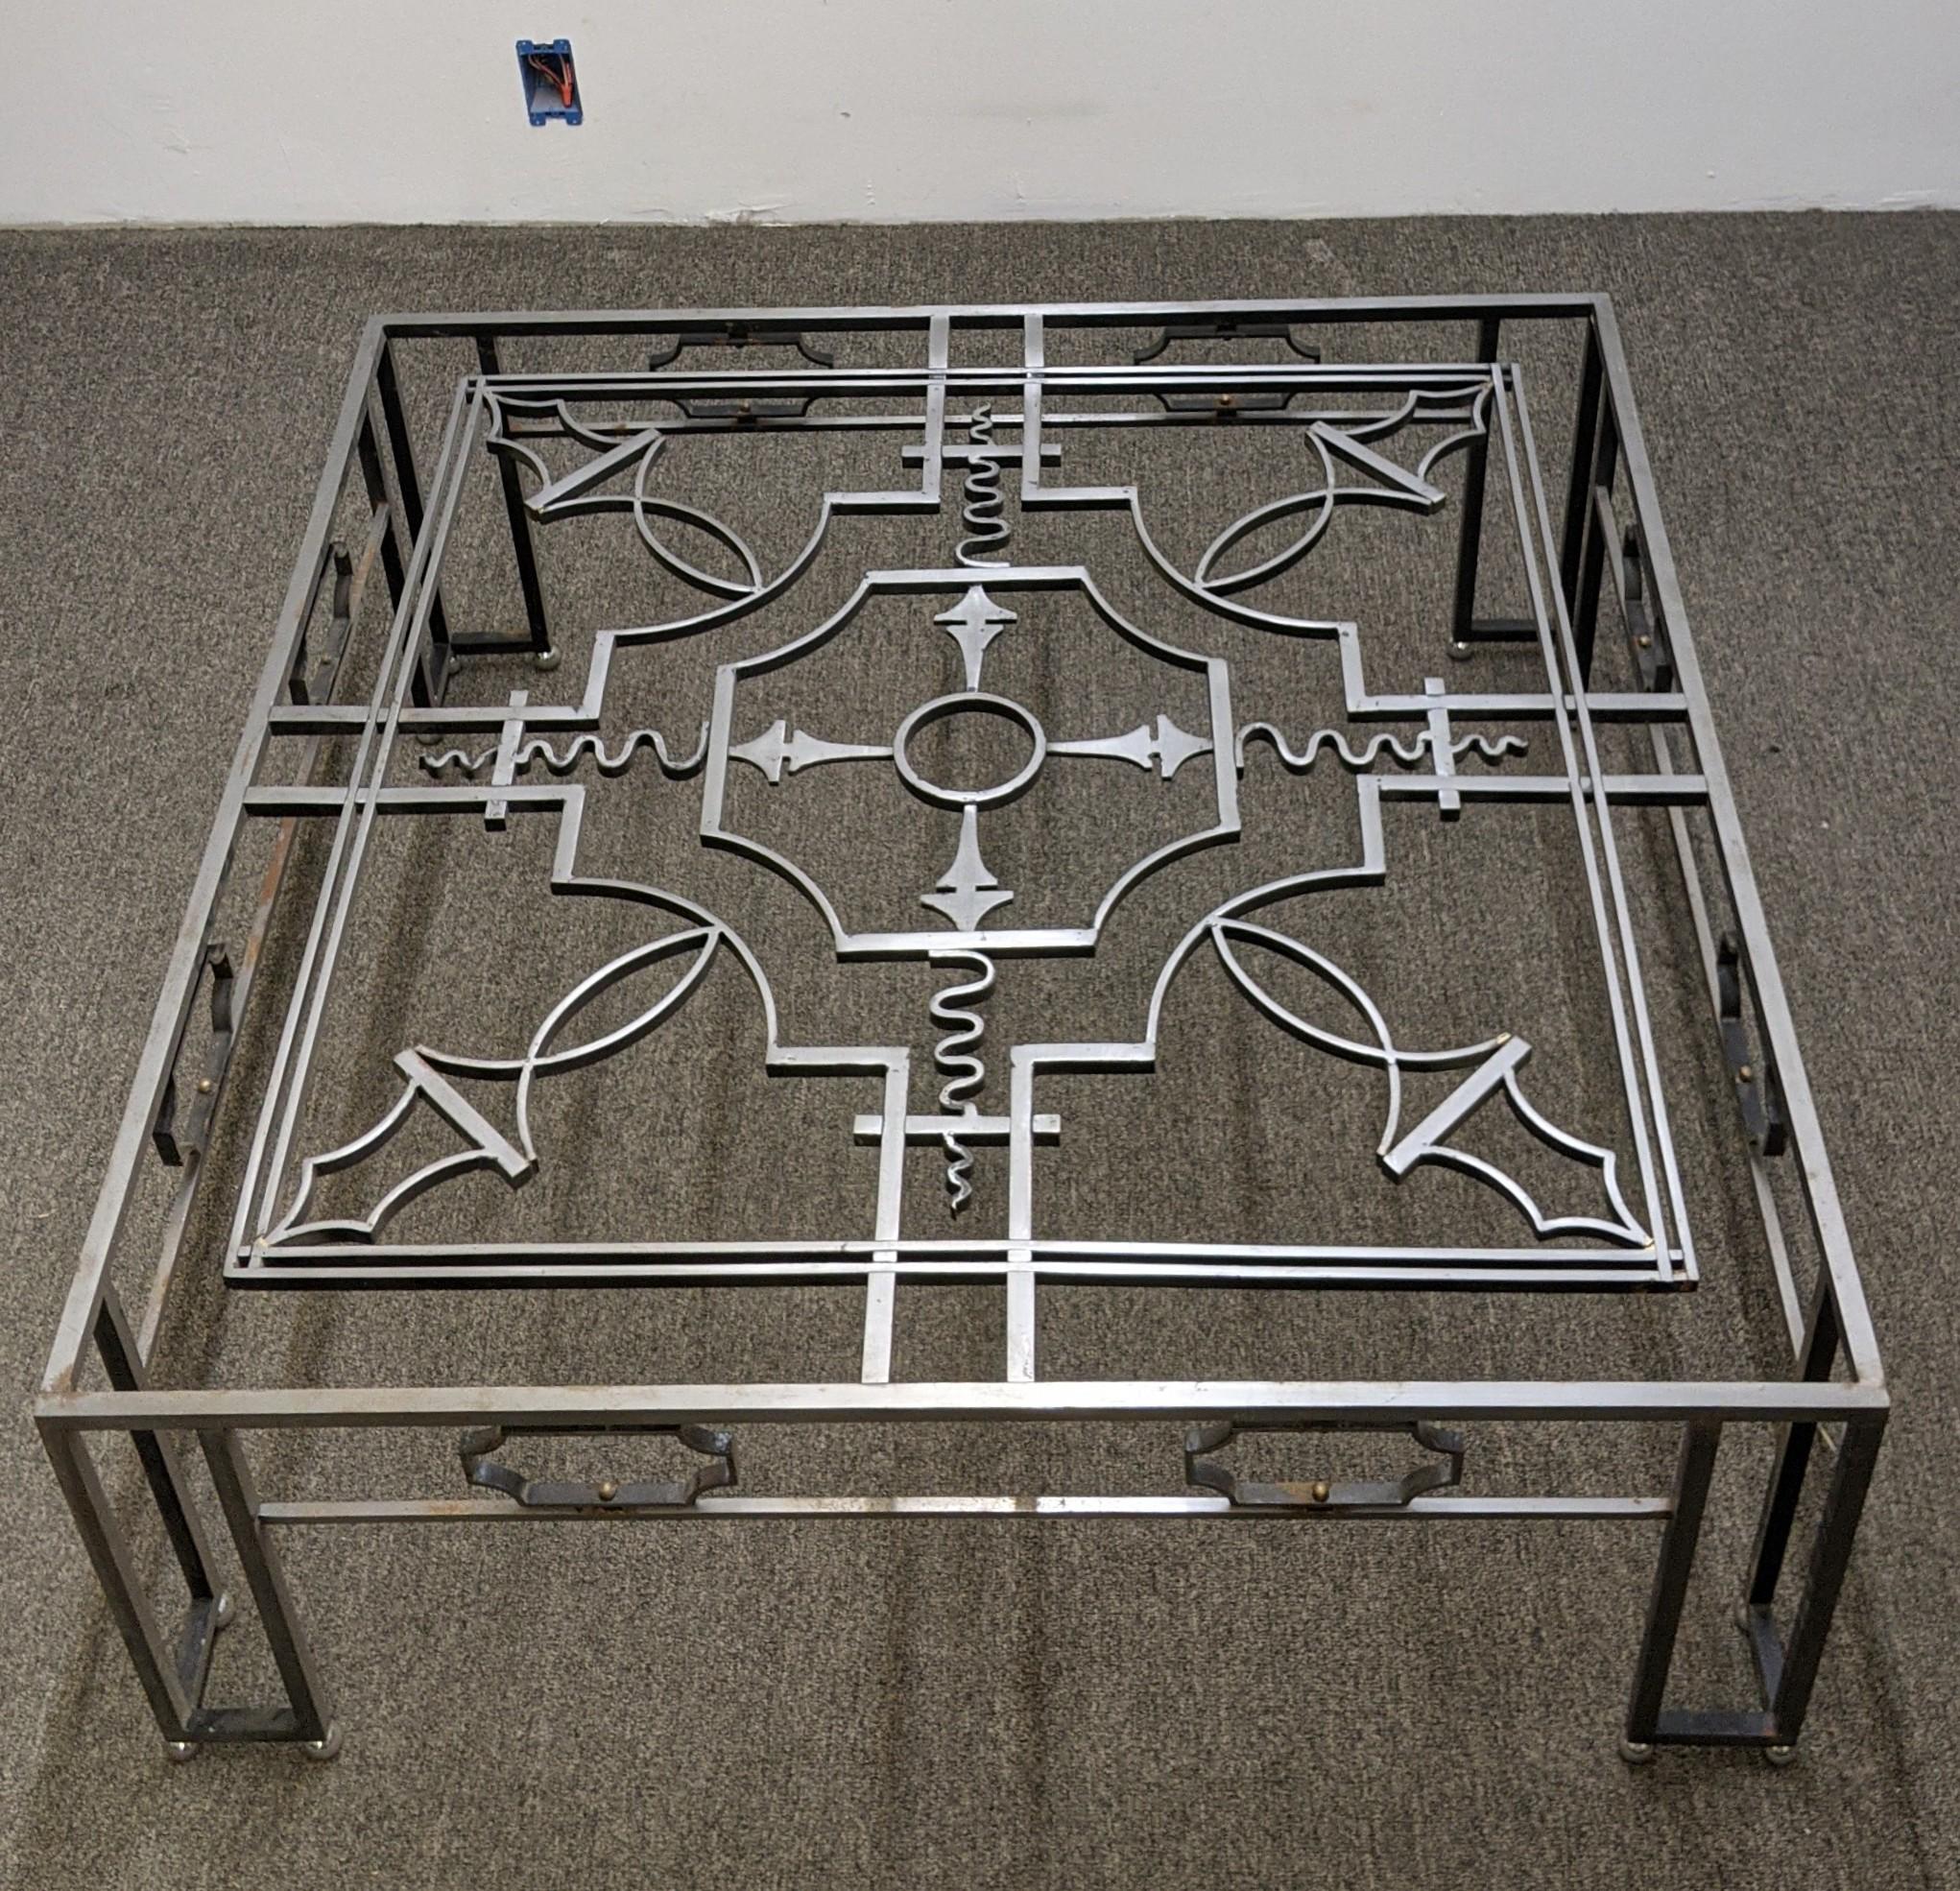 A French Art Deco wrought iron square shaped coffee table, 1940's. With patterns motifs throughout, with angular legs complemented by three balls. Complimentary drop-off to the tri-state area. We are the rare source specializing in French Art Deco